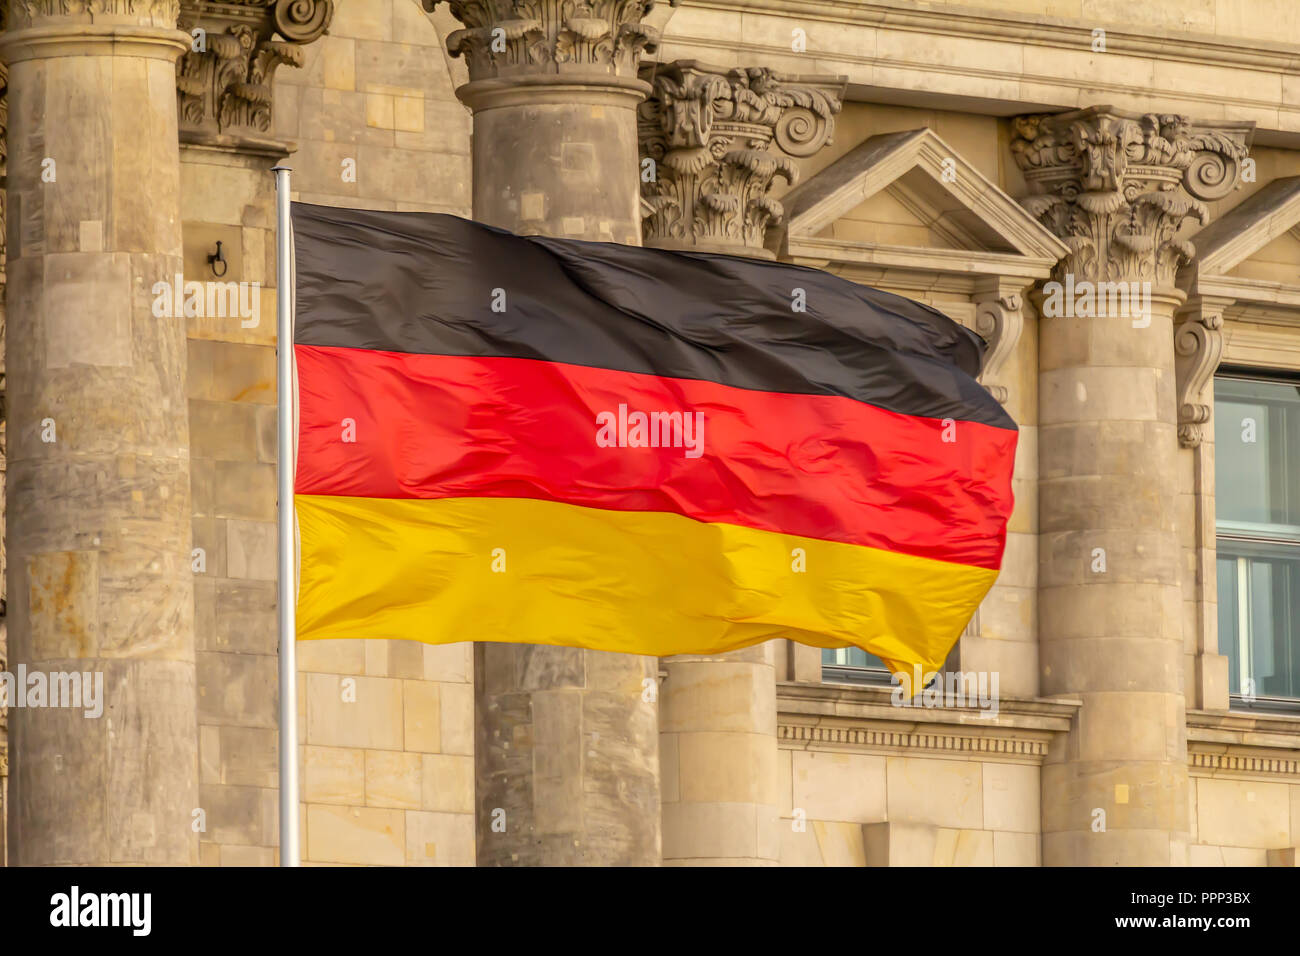 Federal Republic of Germany, German national flag waving in front of the Parliament building columns Stock Photo